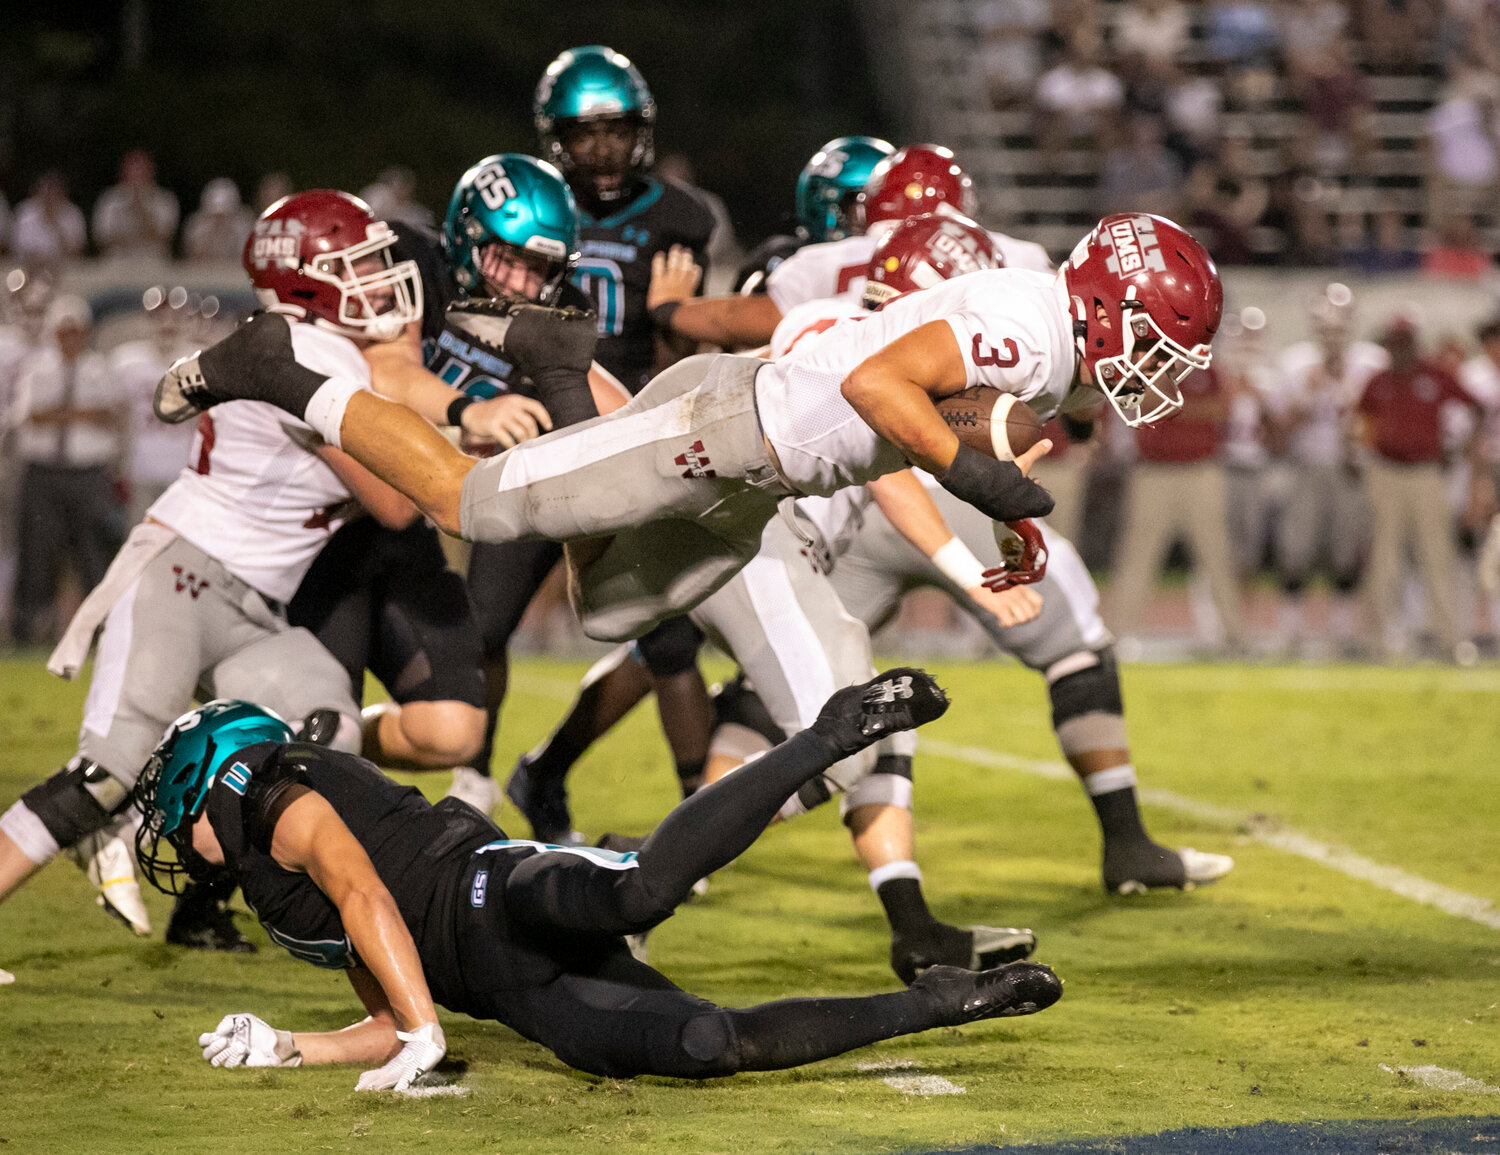 Gulf Shores junior Carter Byrd (4) upends UMS-Wright senior Jake Jaye (3) in the second half of region action at the Gulf Shores Sportsplex on Friday, Sept. 15. Byrd and the Dolphin defense registered a 17-0 shutout of the sixth-ranked Bulldog offense.